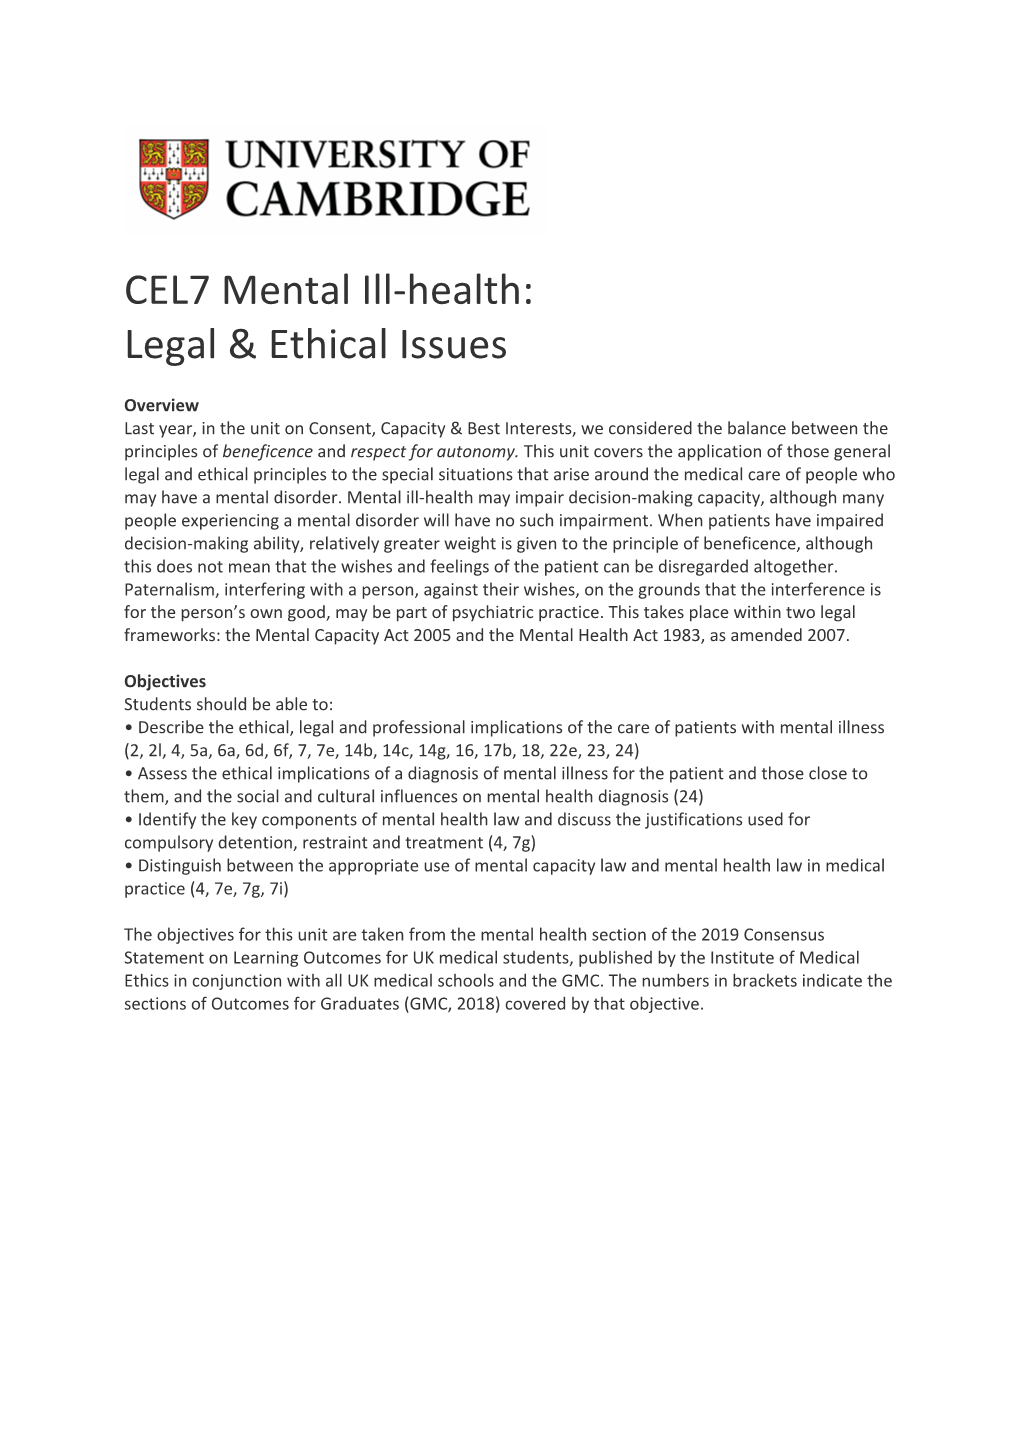 CEL7 Mental Ill-Health: Legal & Ethical Issues